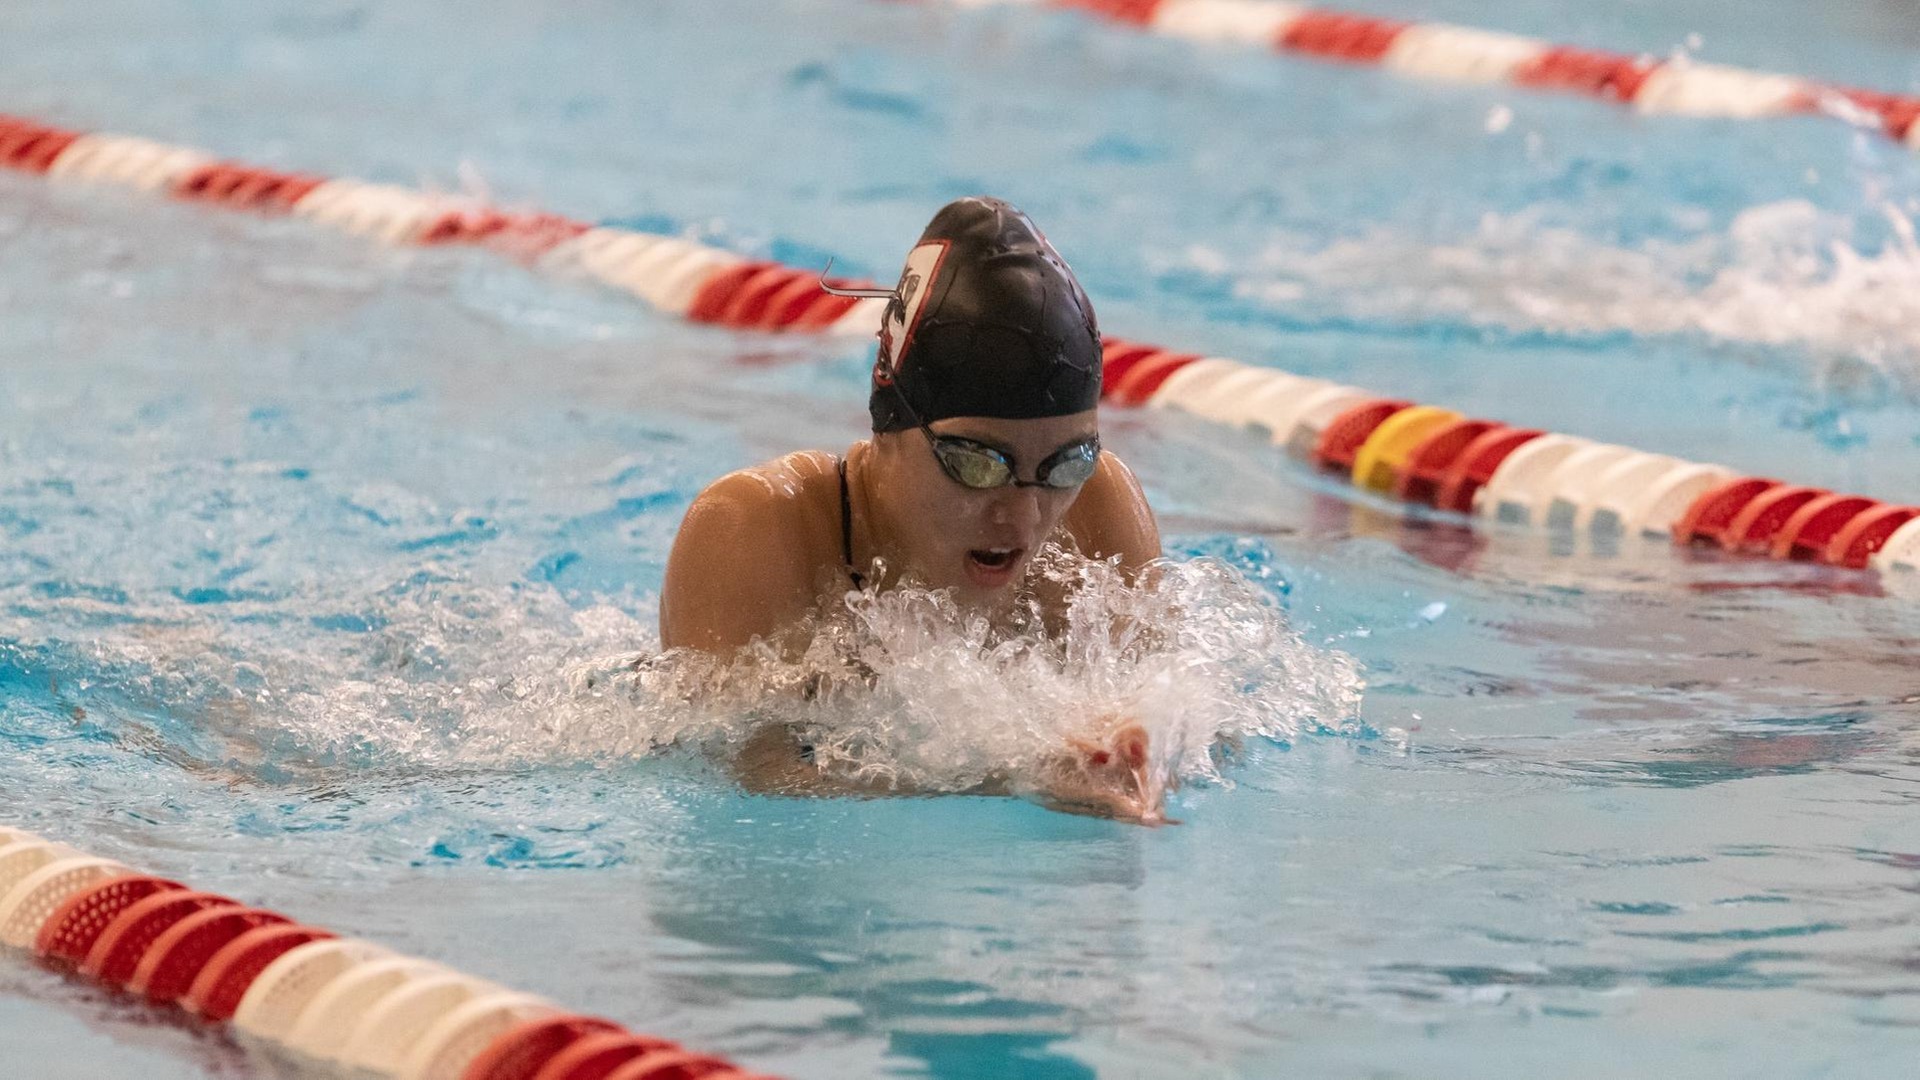 women's swimmer doing the breaststroke with head out of water wearing a black swim cap